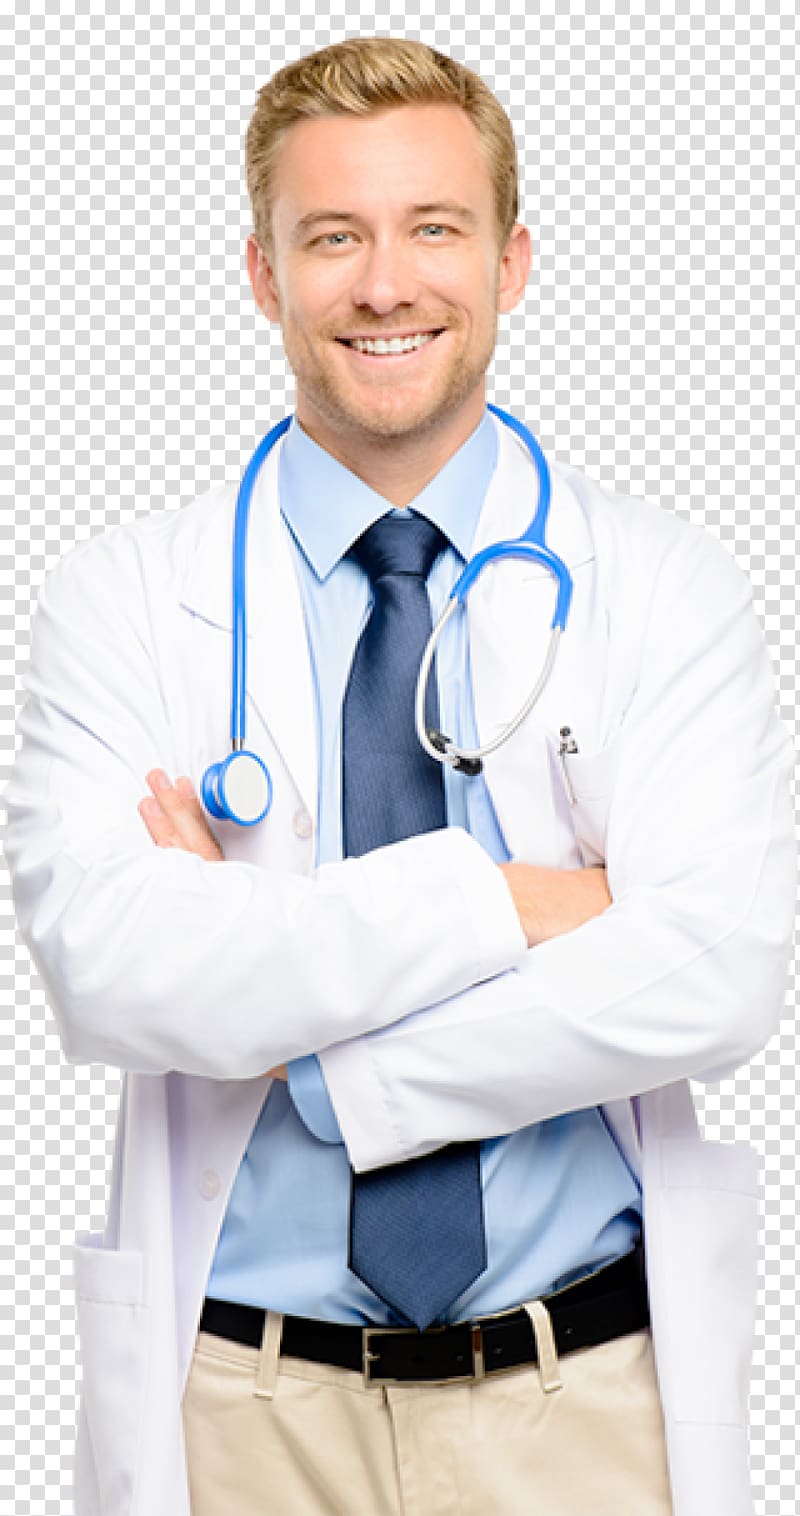 doctor illustration, Health Care Internal medicine Clinic Physician, doctors and nurses transparent background PNG clipart